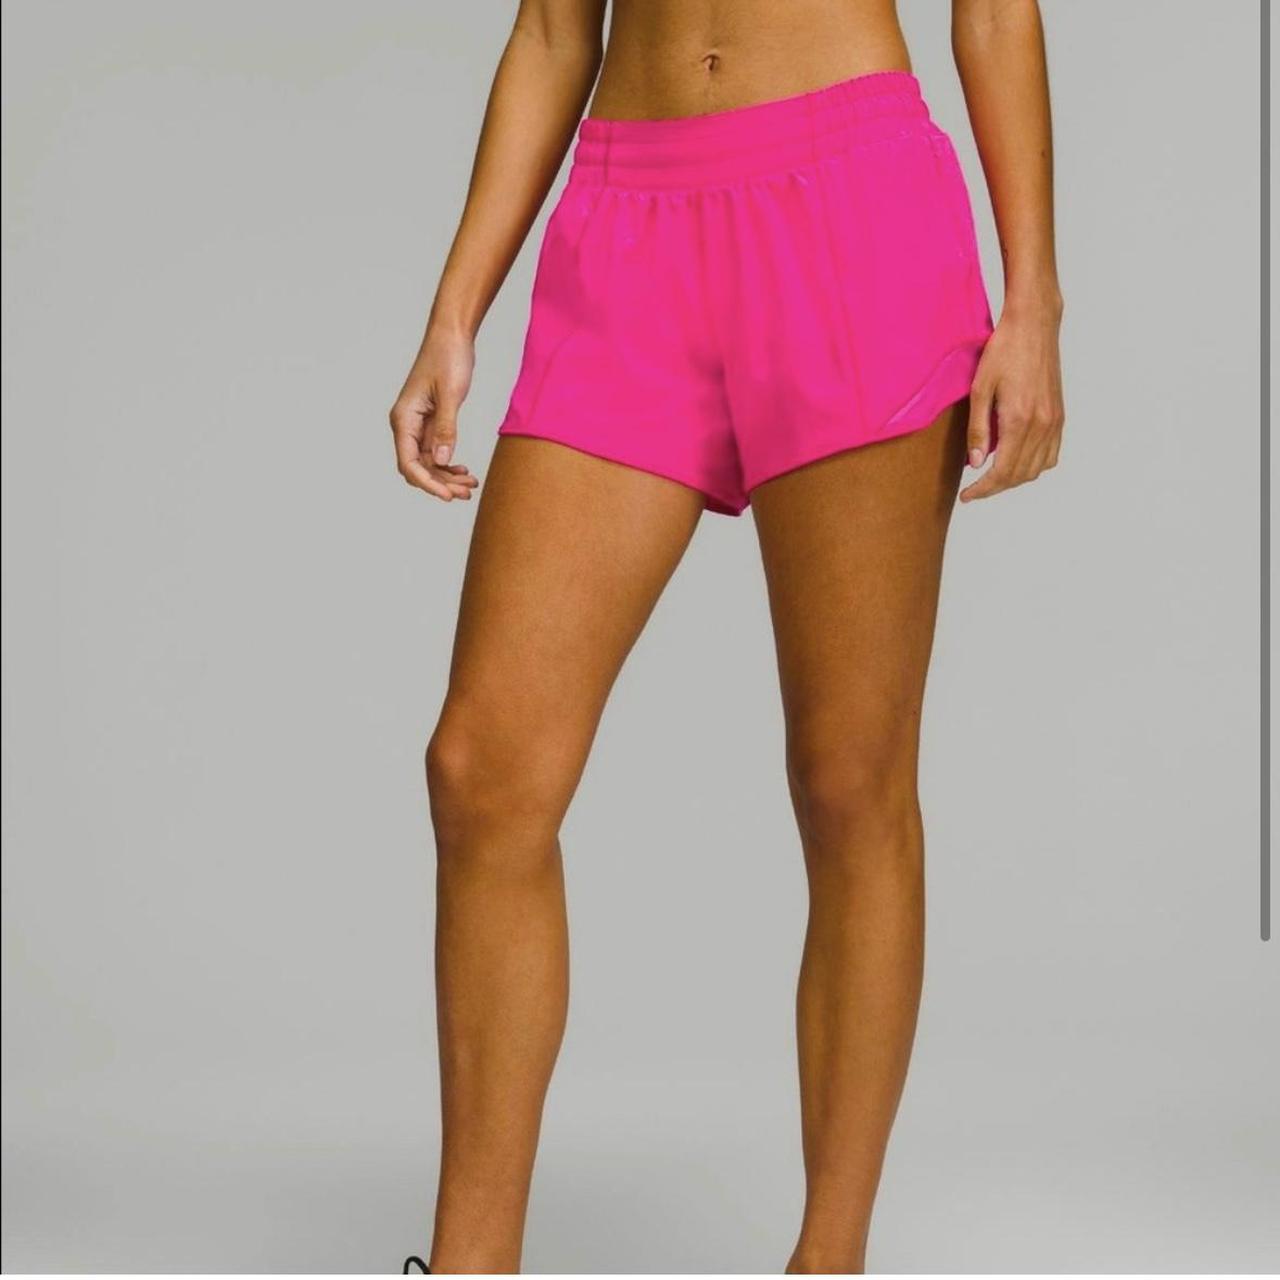 NWT LULULEMON HOTTY Hot HR High-Rise Short 4” Sonic Pink Size 6 $68.00 -  PicClick